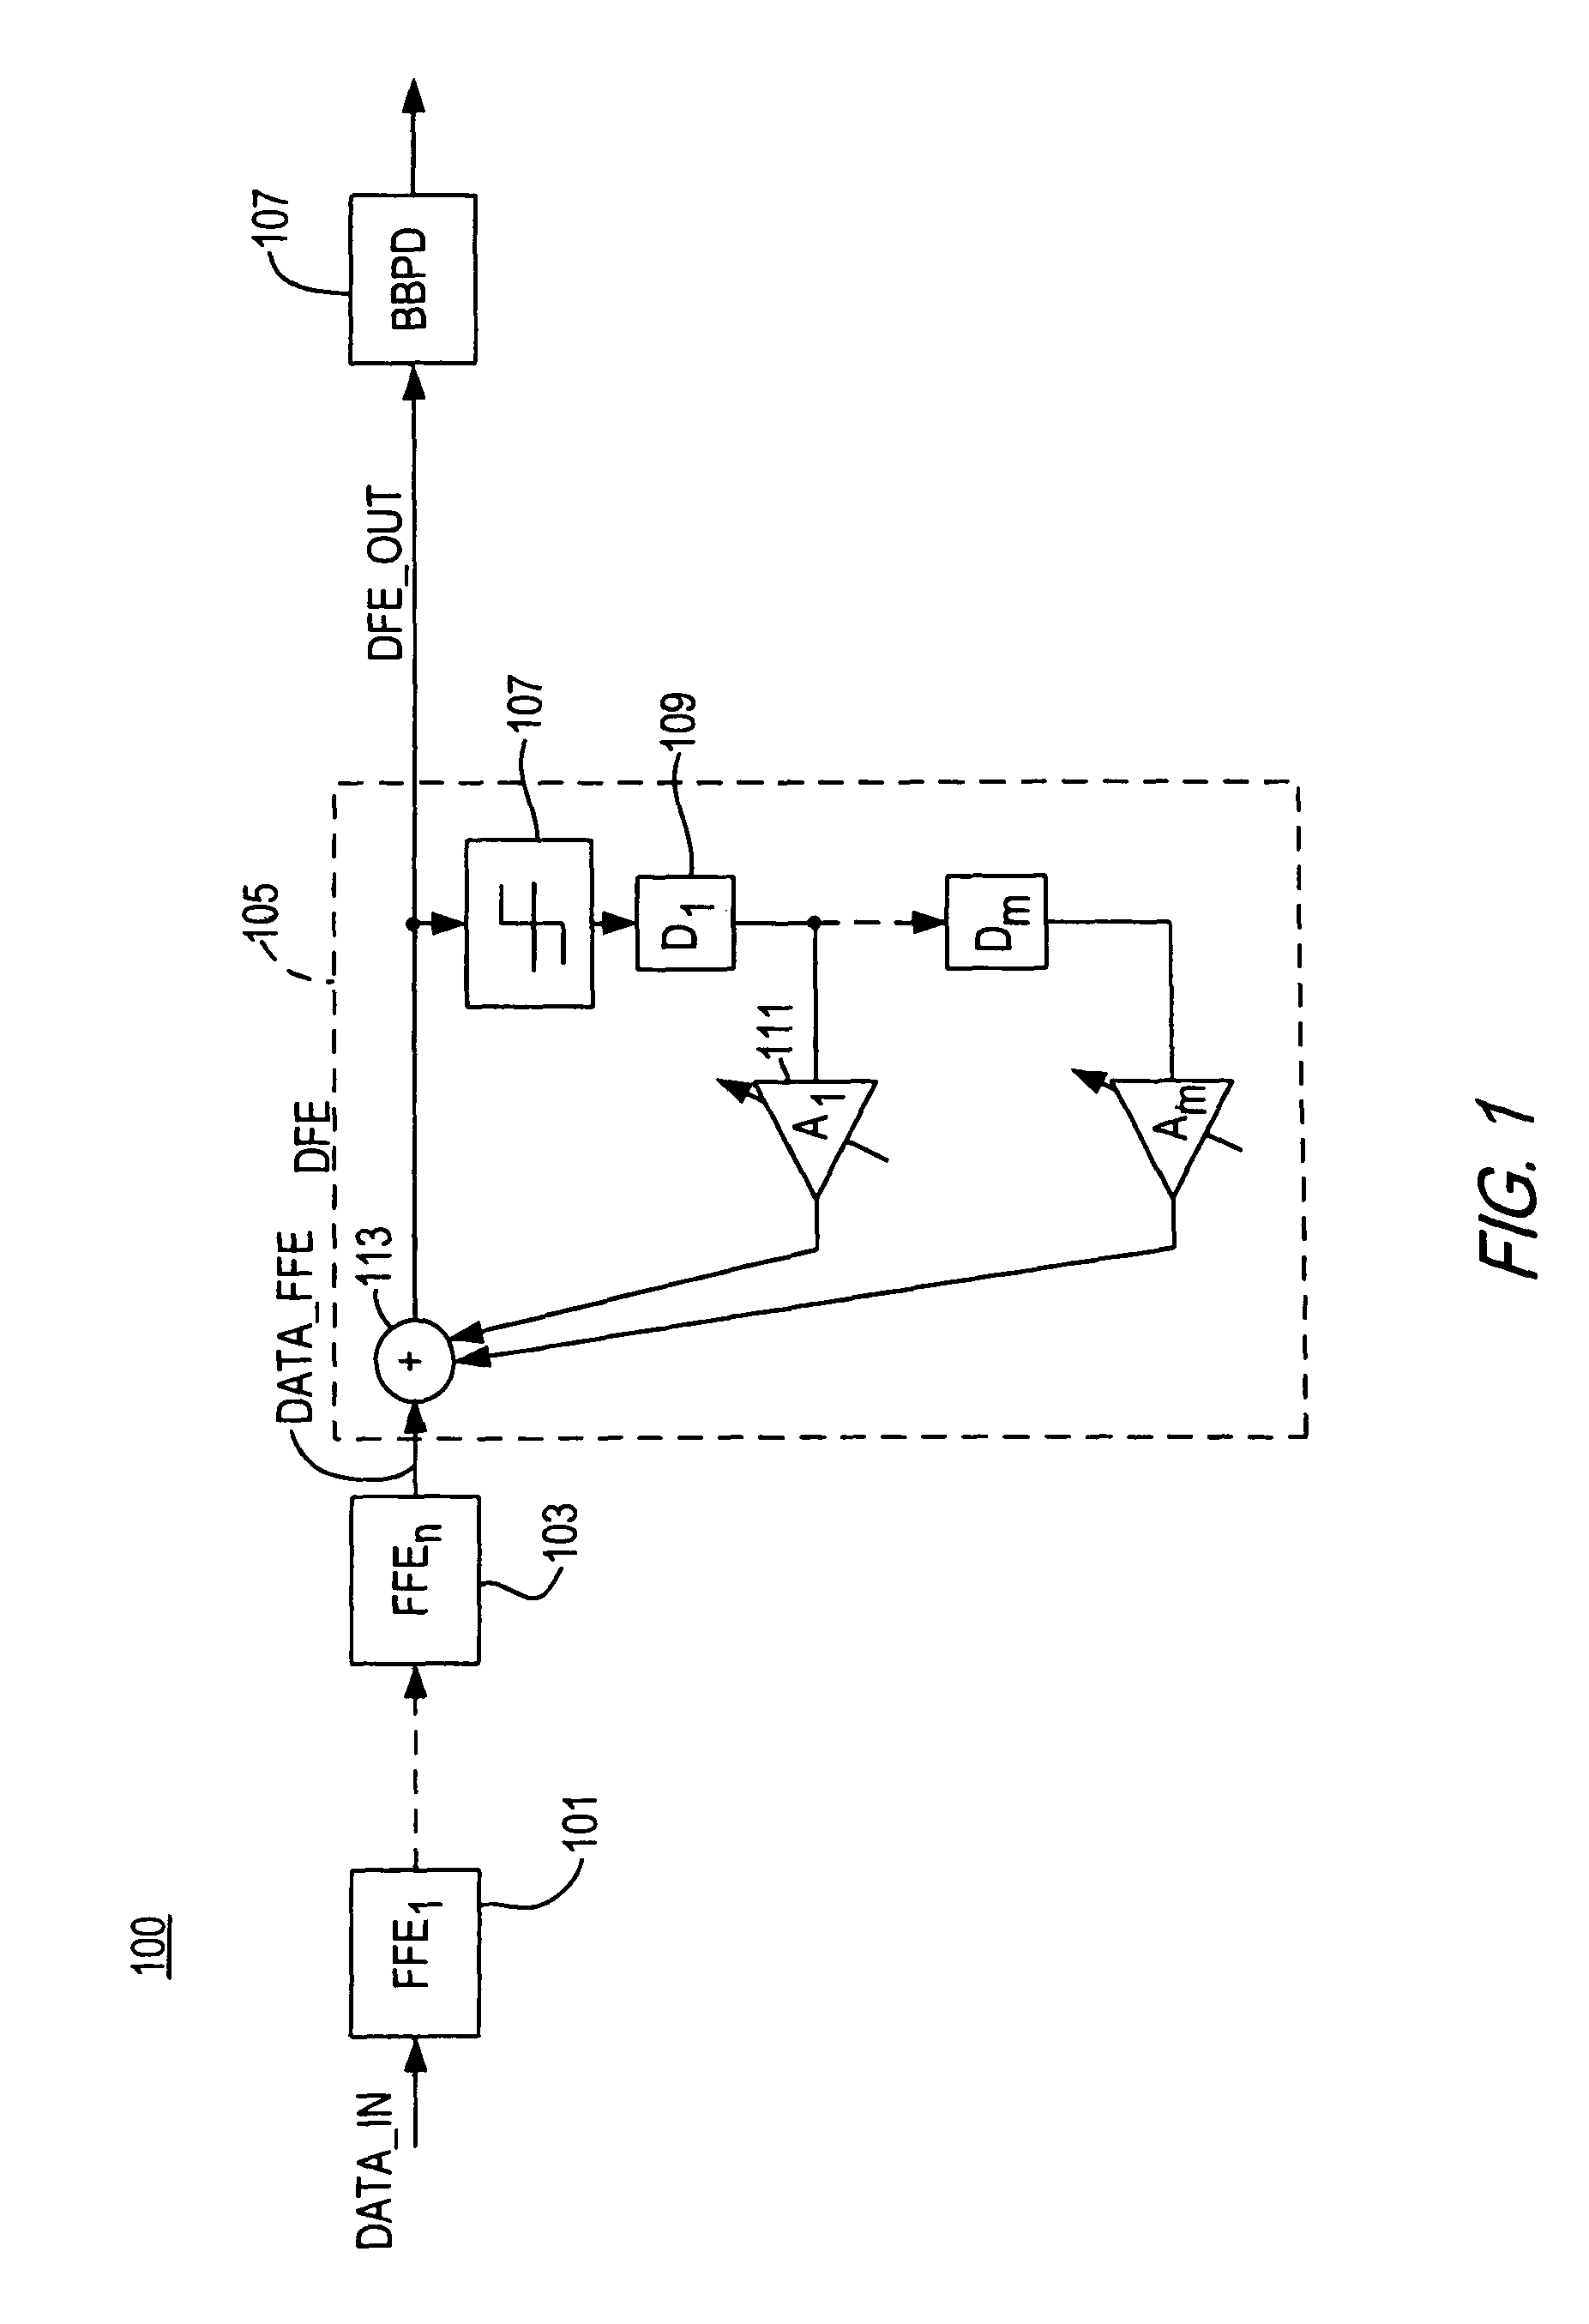 Half-rate DFE with duplicate path for high data-rate operation